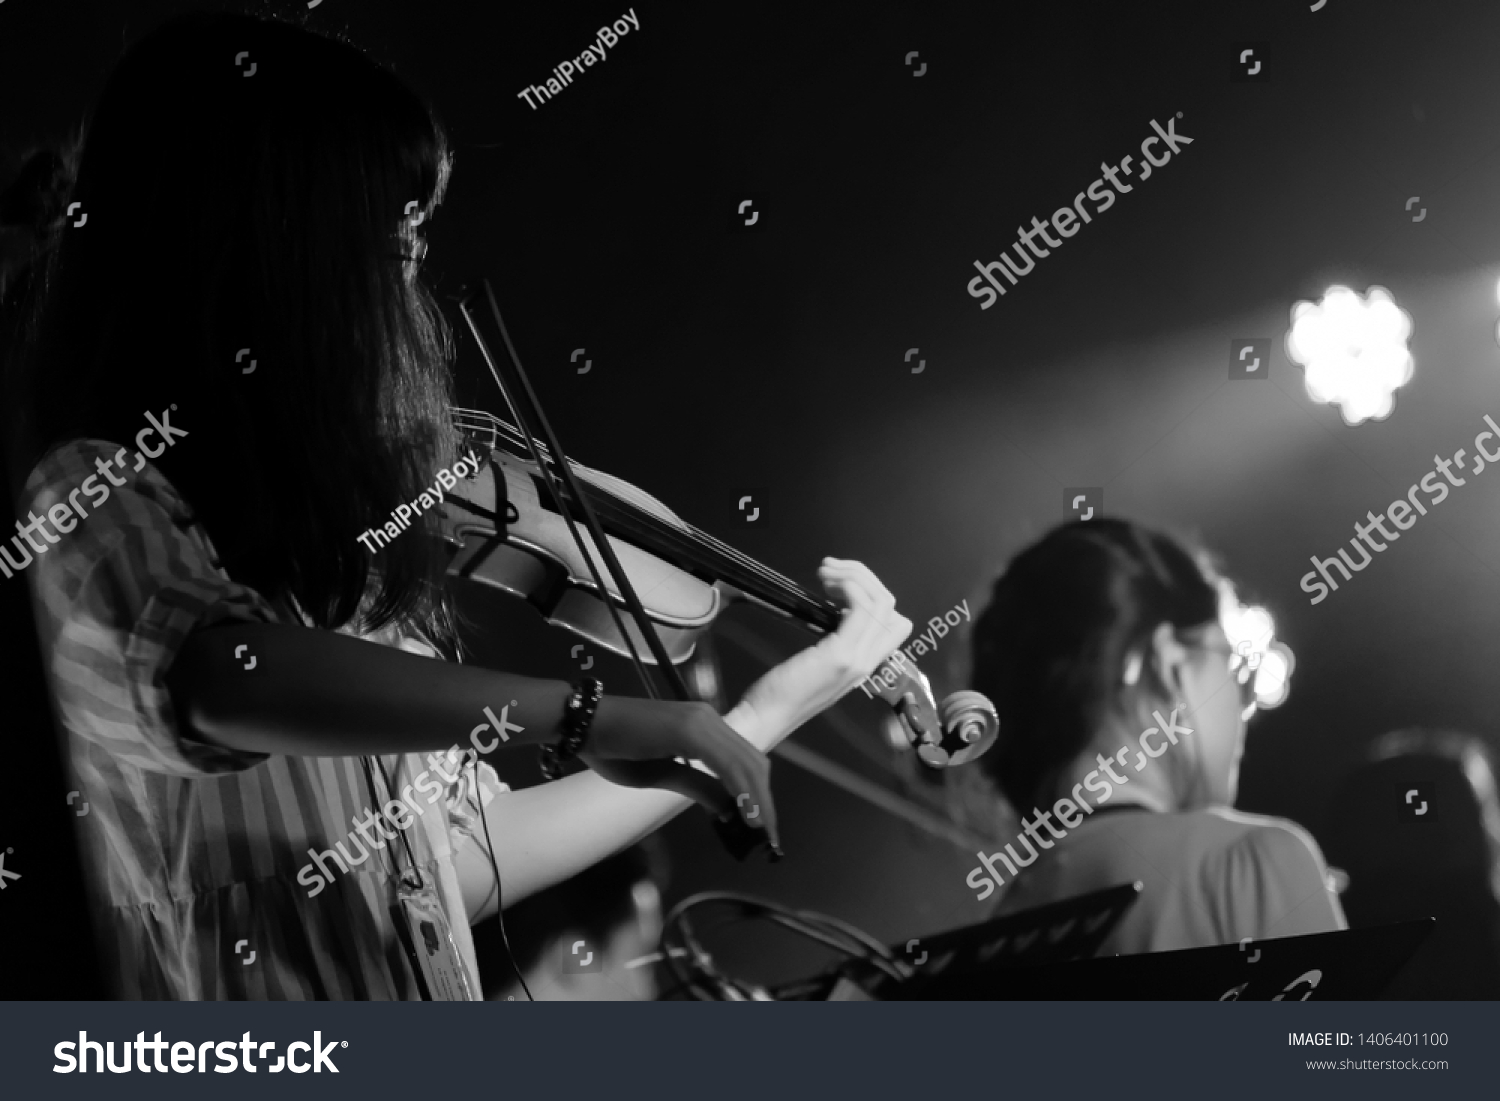 Young Violinist Girl Performance with Her Violin iNstrument on the indoor Concert Stage. Black and White. #1406401100